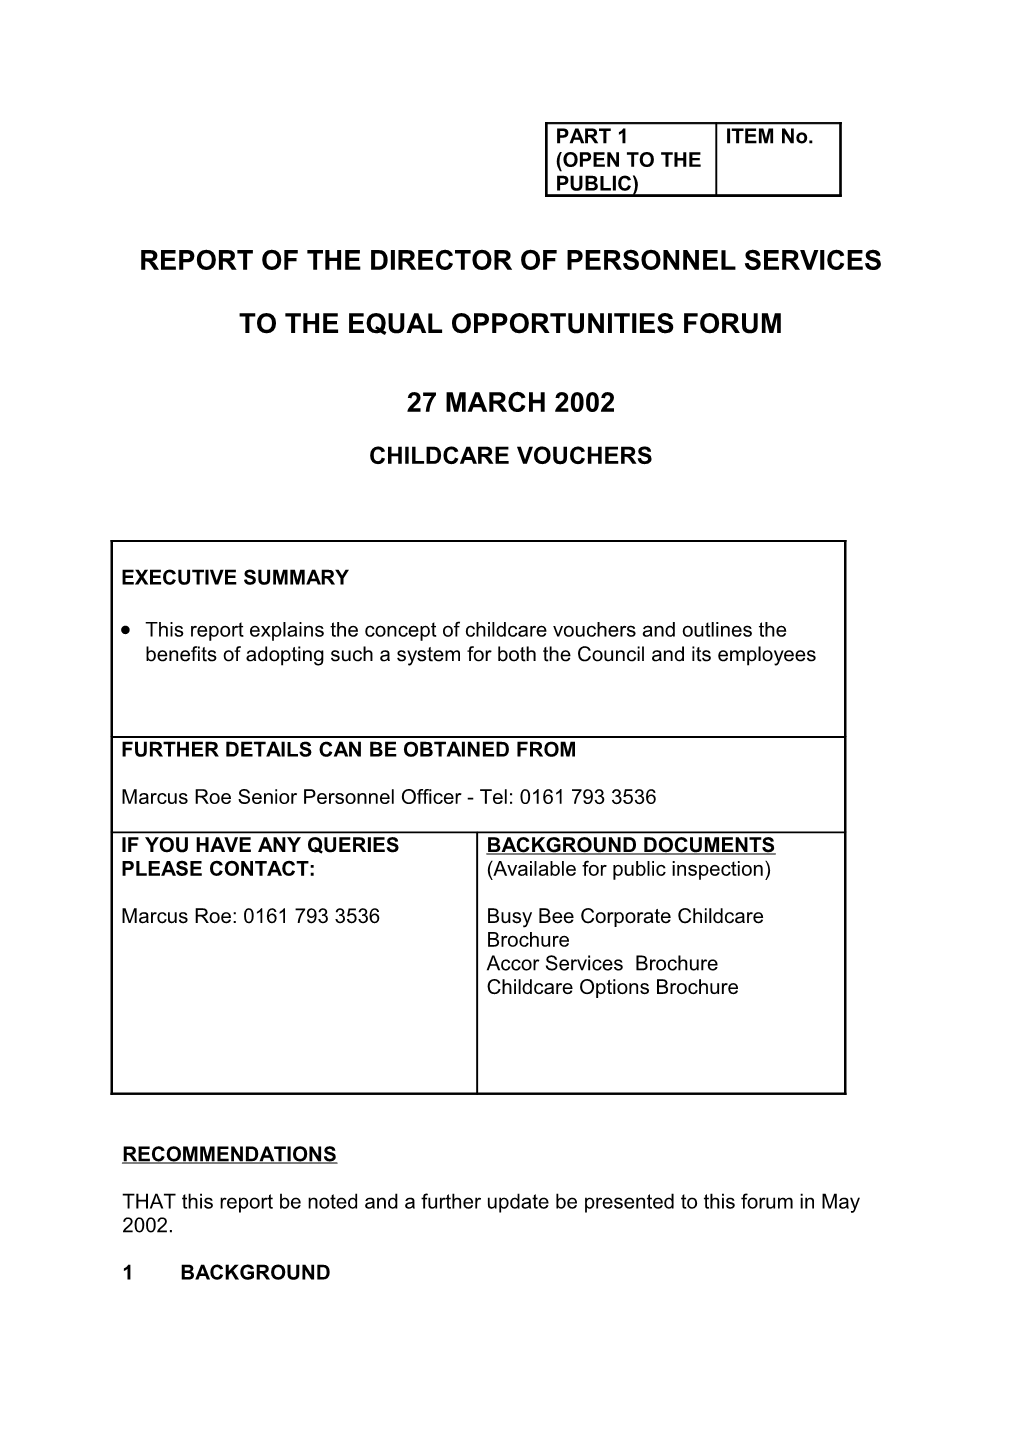 Report of the Director of Personnel Services